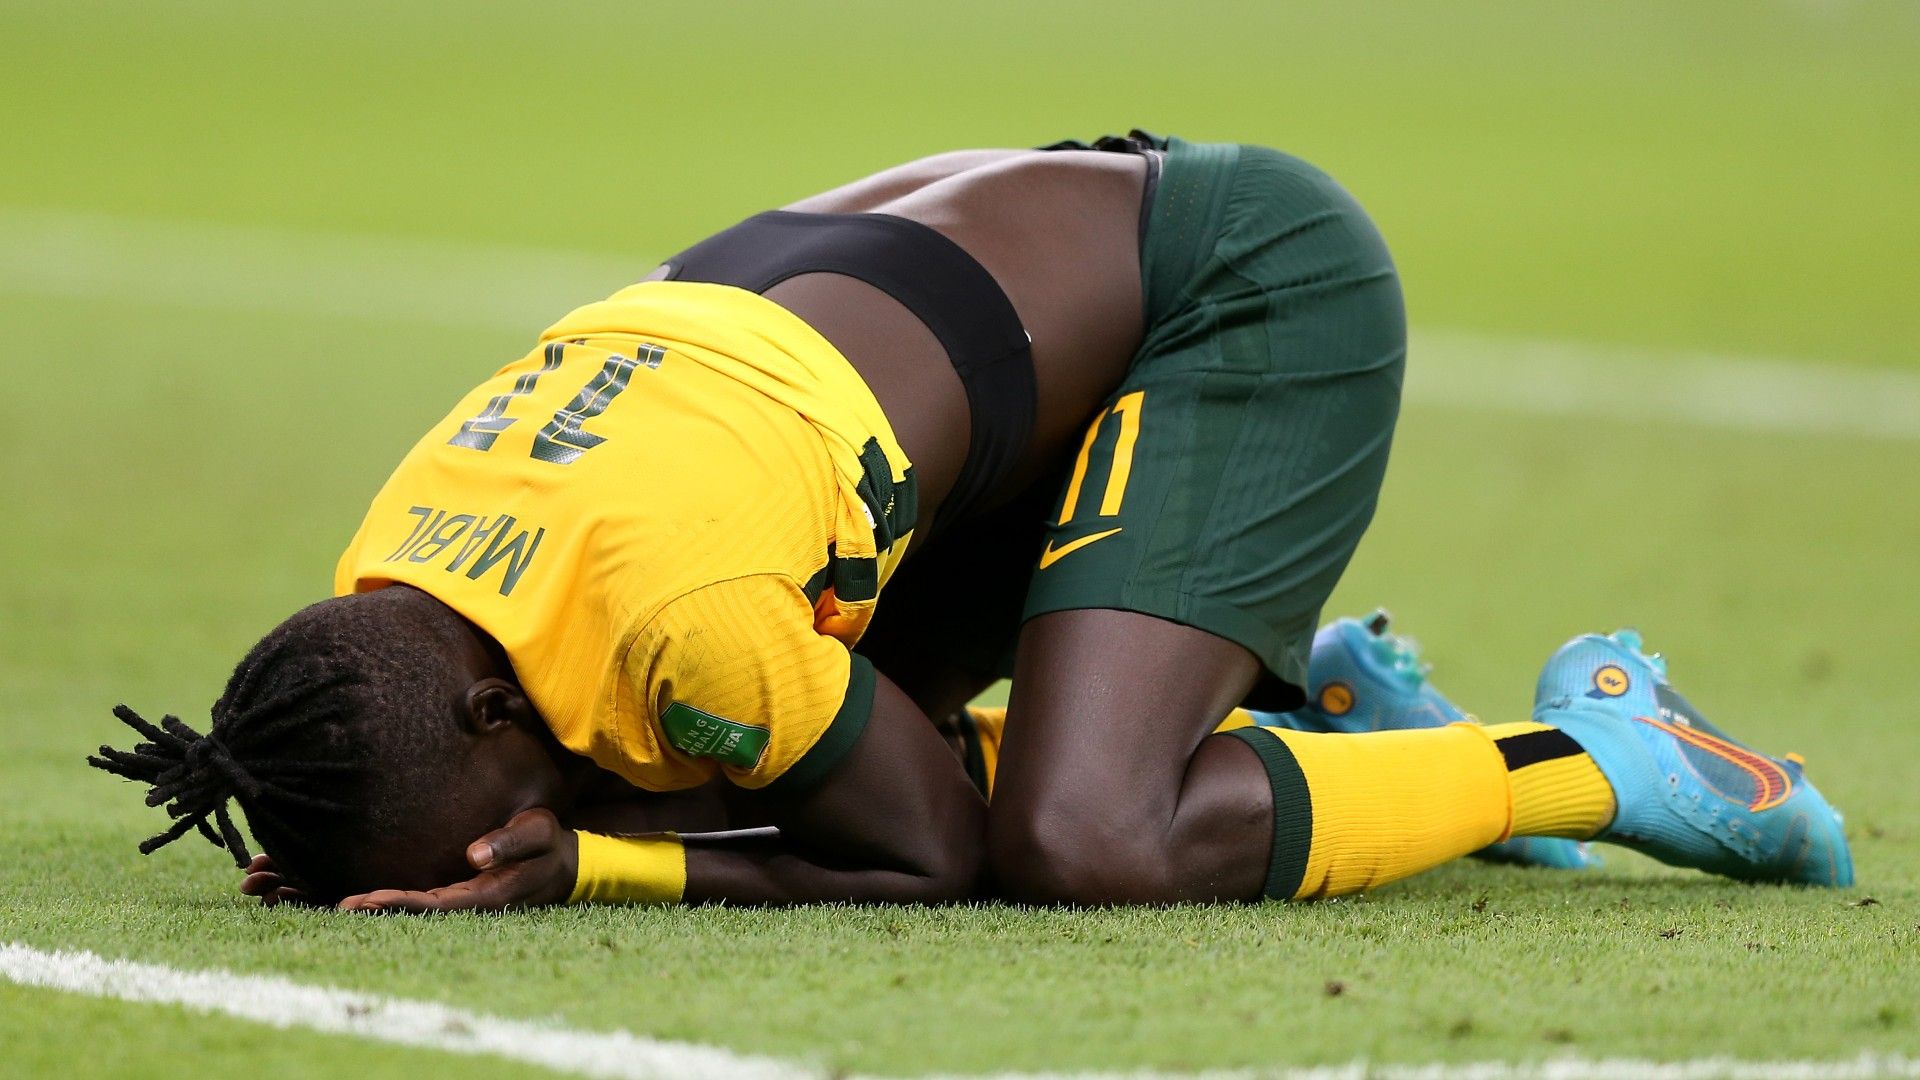 Awer Mabil's emotional message to adopted homeland after World Cup penalty heroics